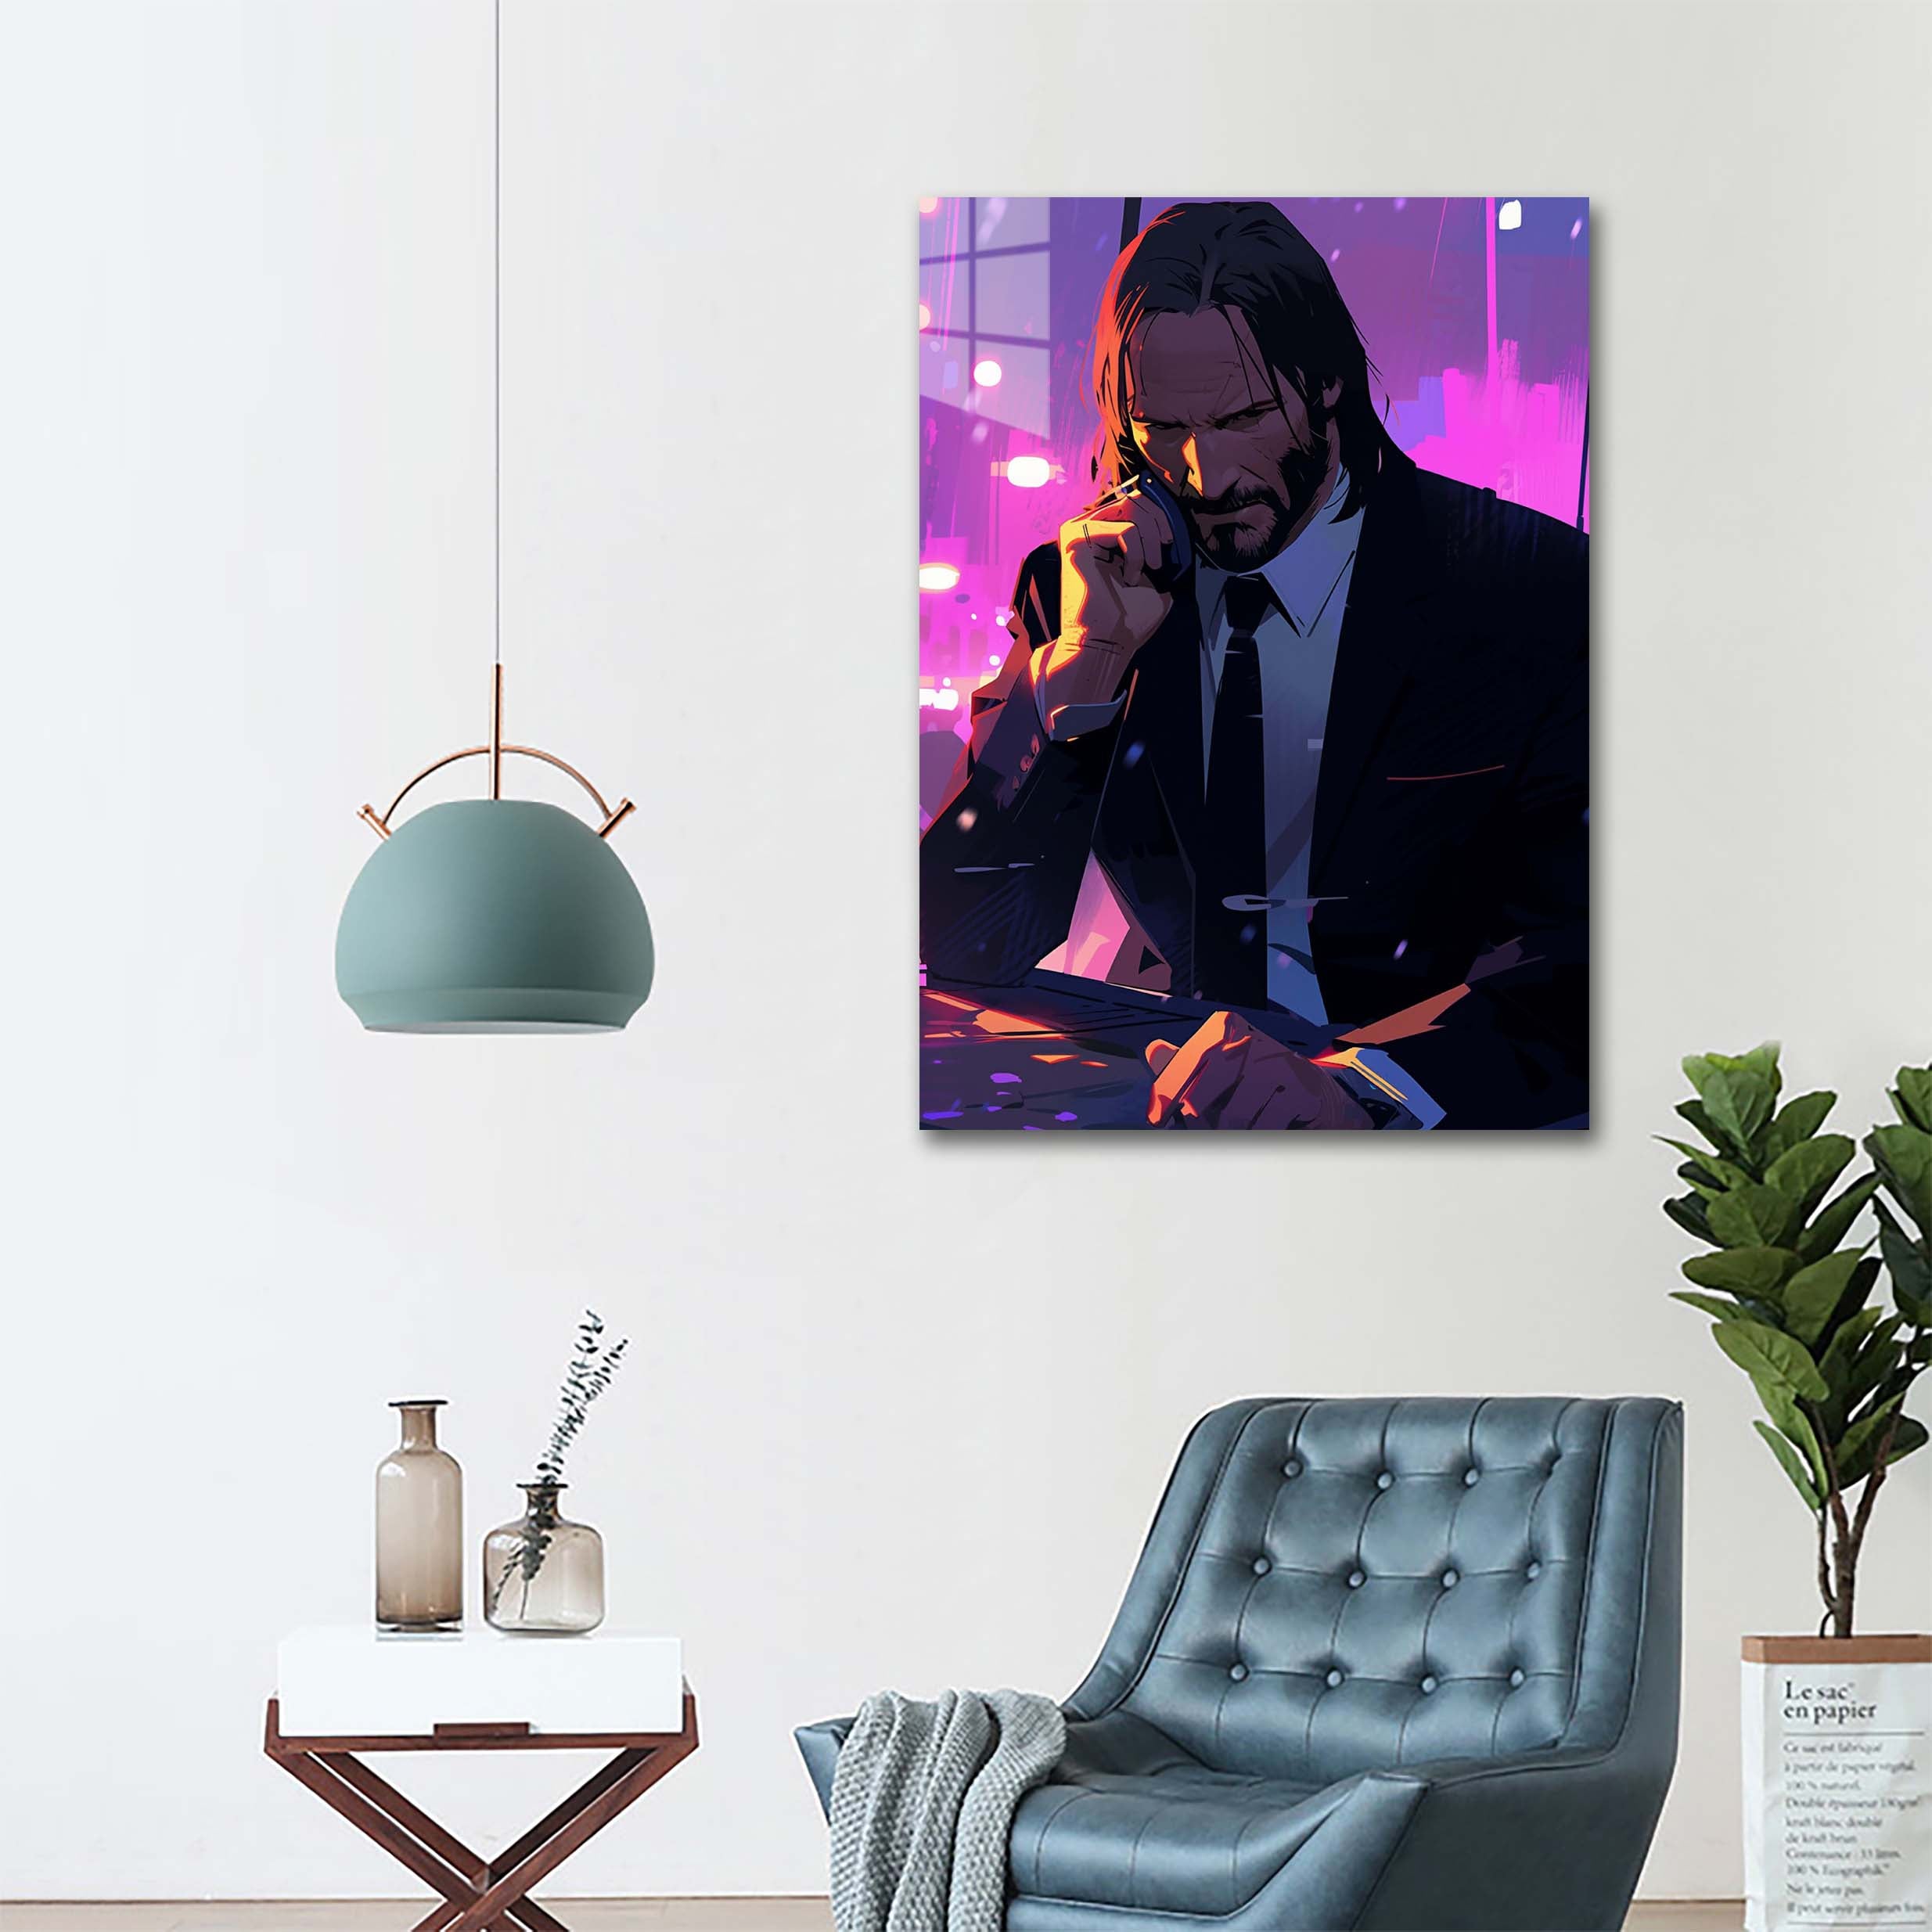 John Wick -designed by @theanimecrossover